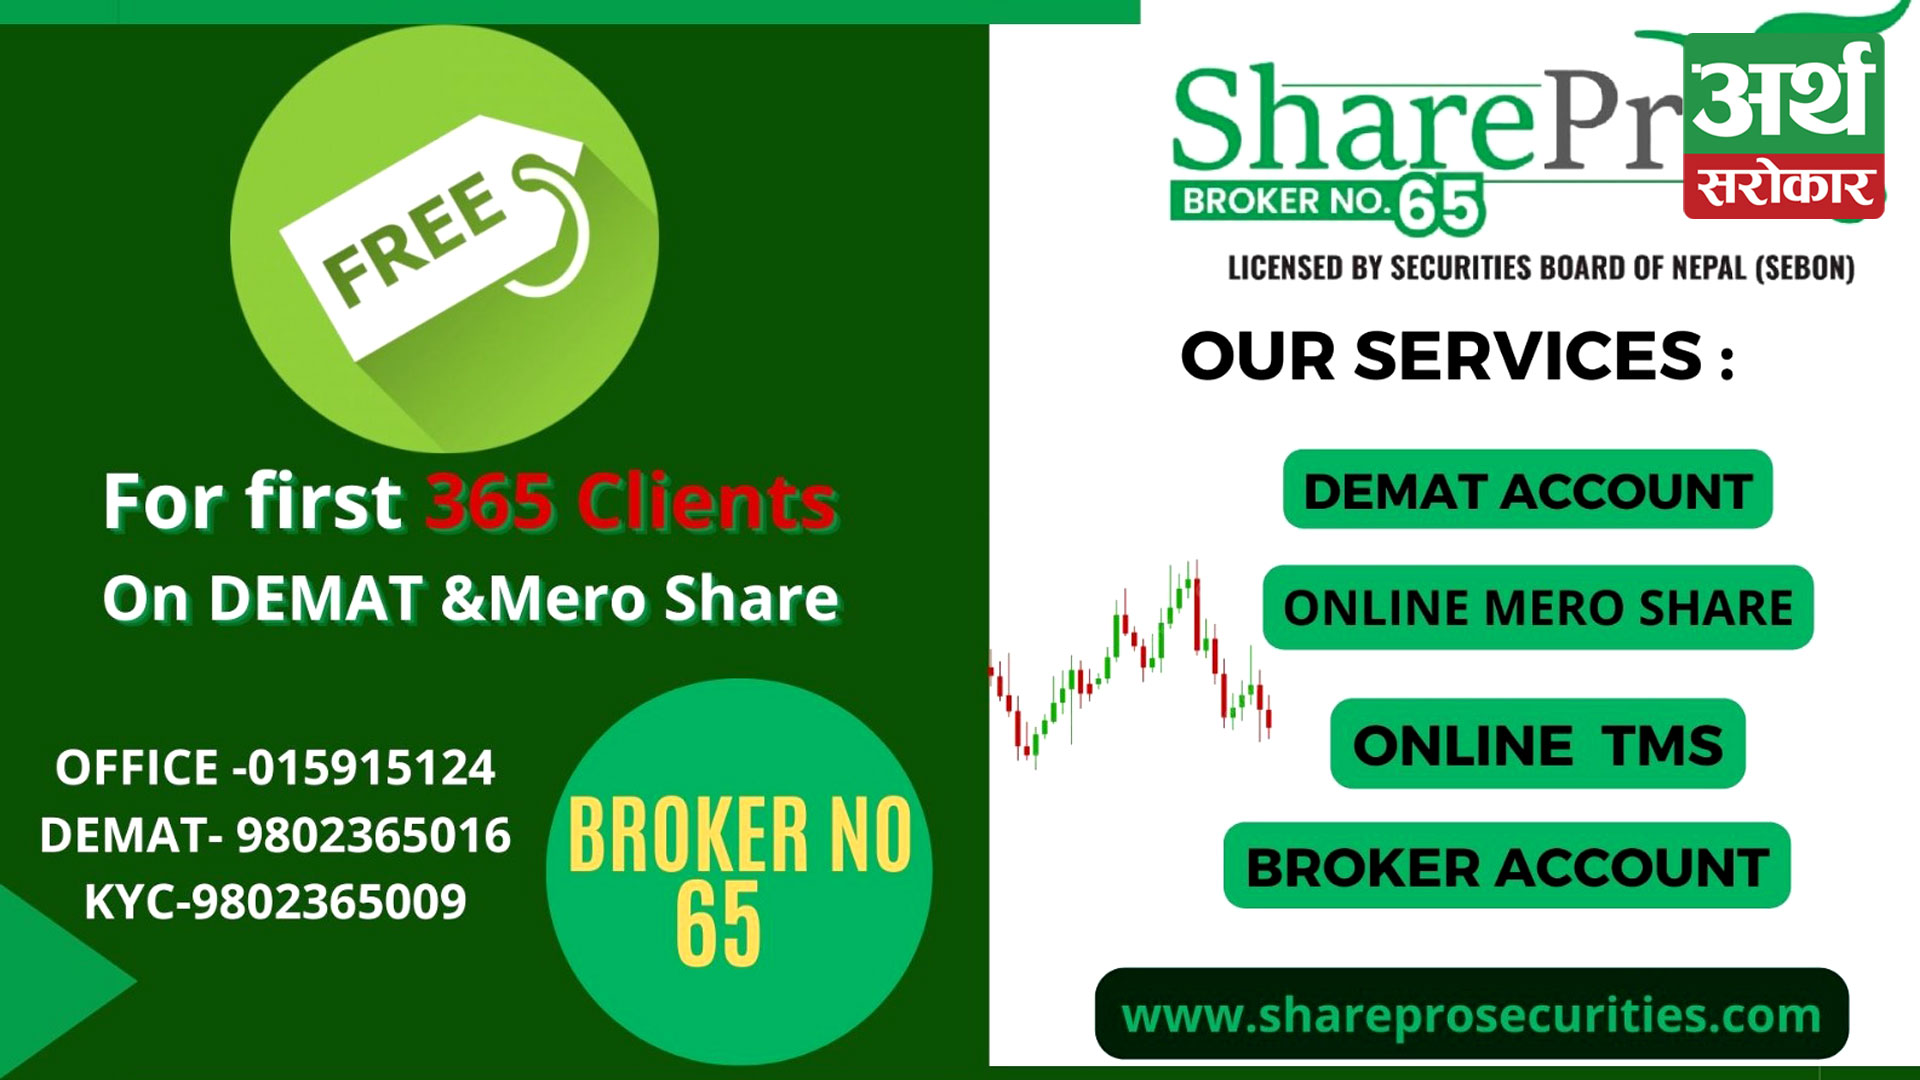 SharePro Securities Announces Attractive Offers for Demat and Mero Share Subscribers